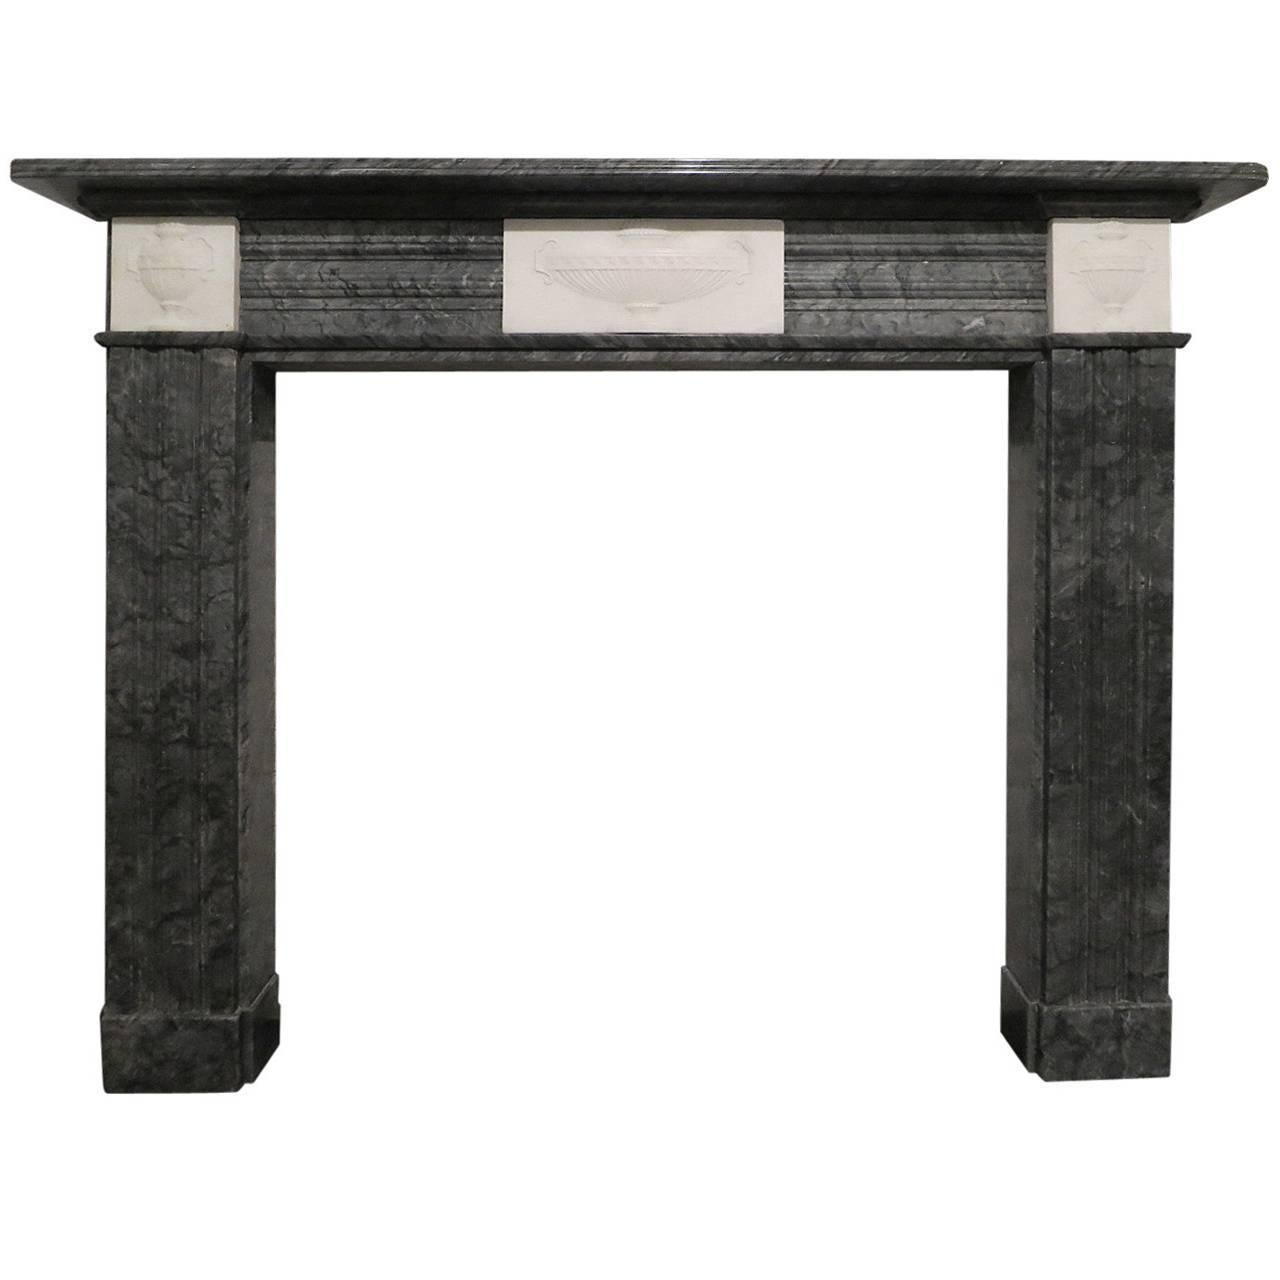 Early 19th Century Bardiglio Marble Fireplace Mantel